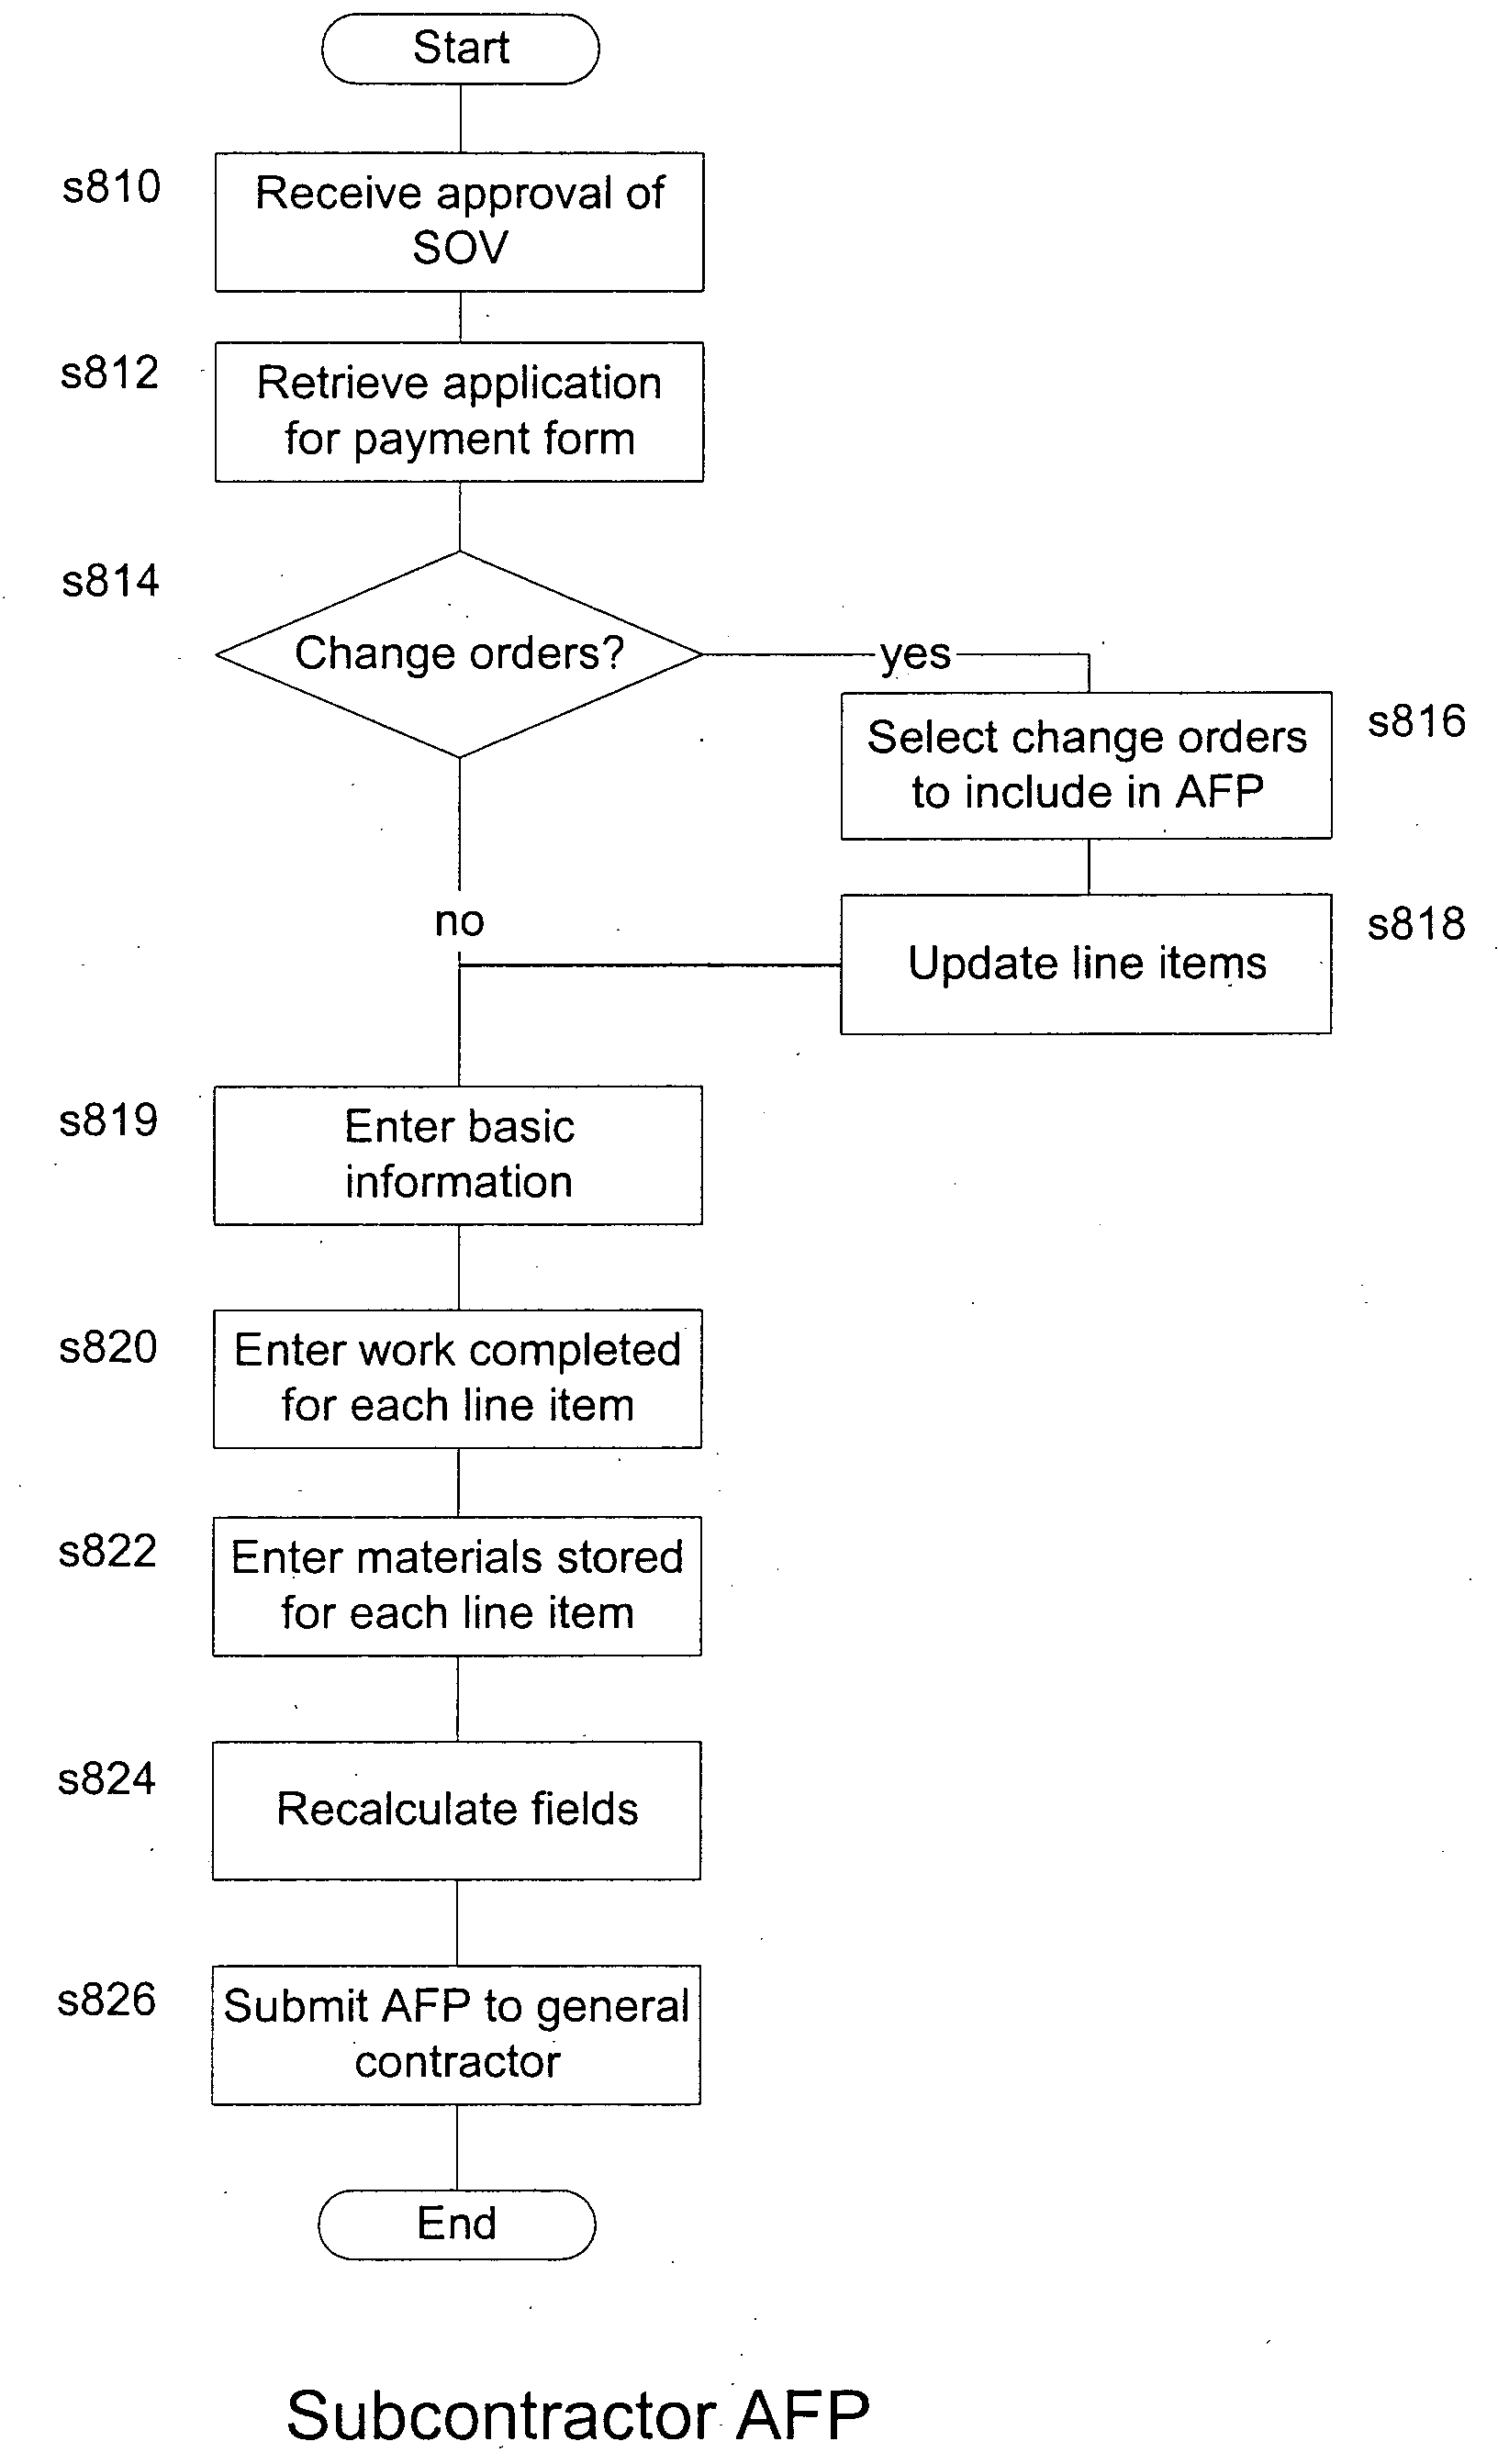 Administering a contract over a data network